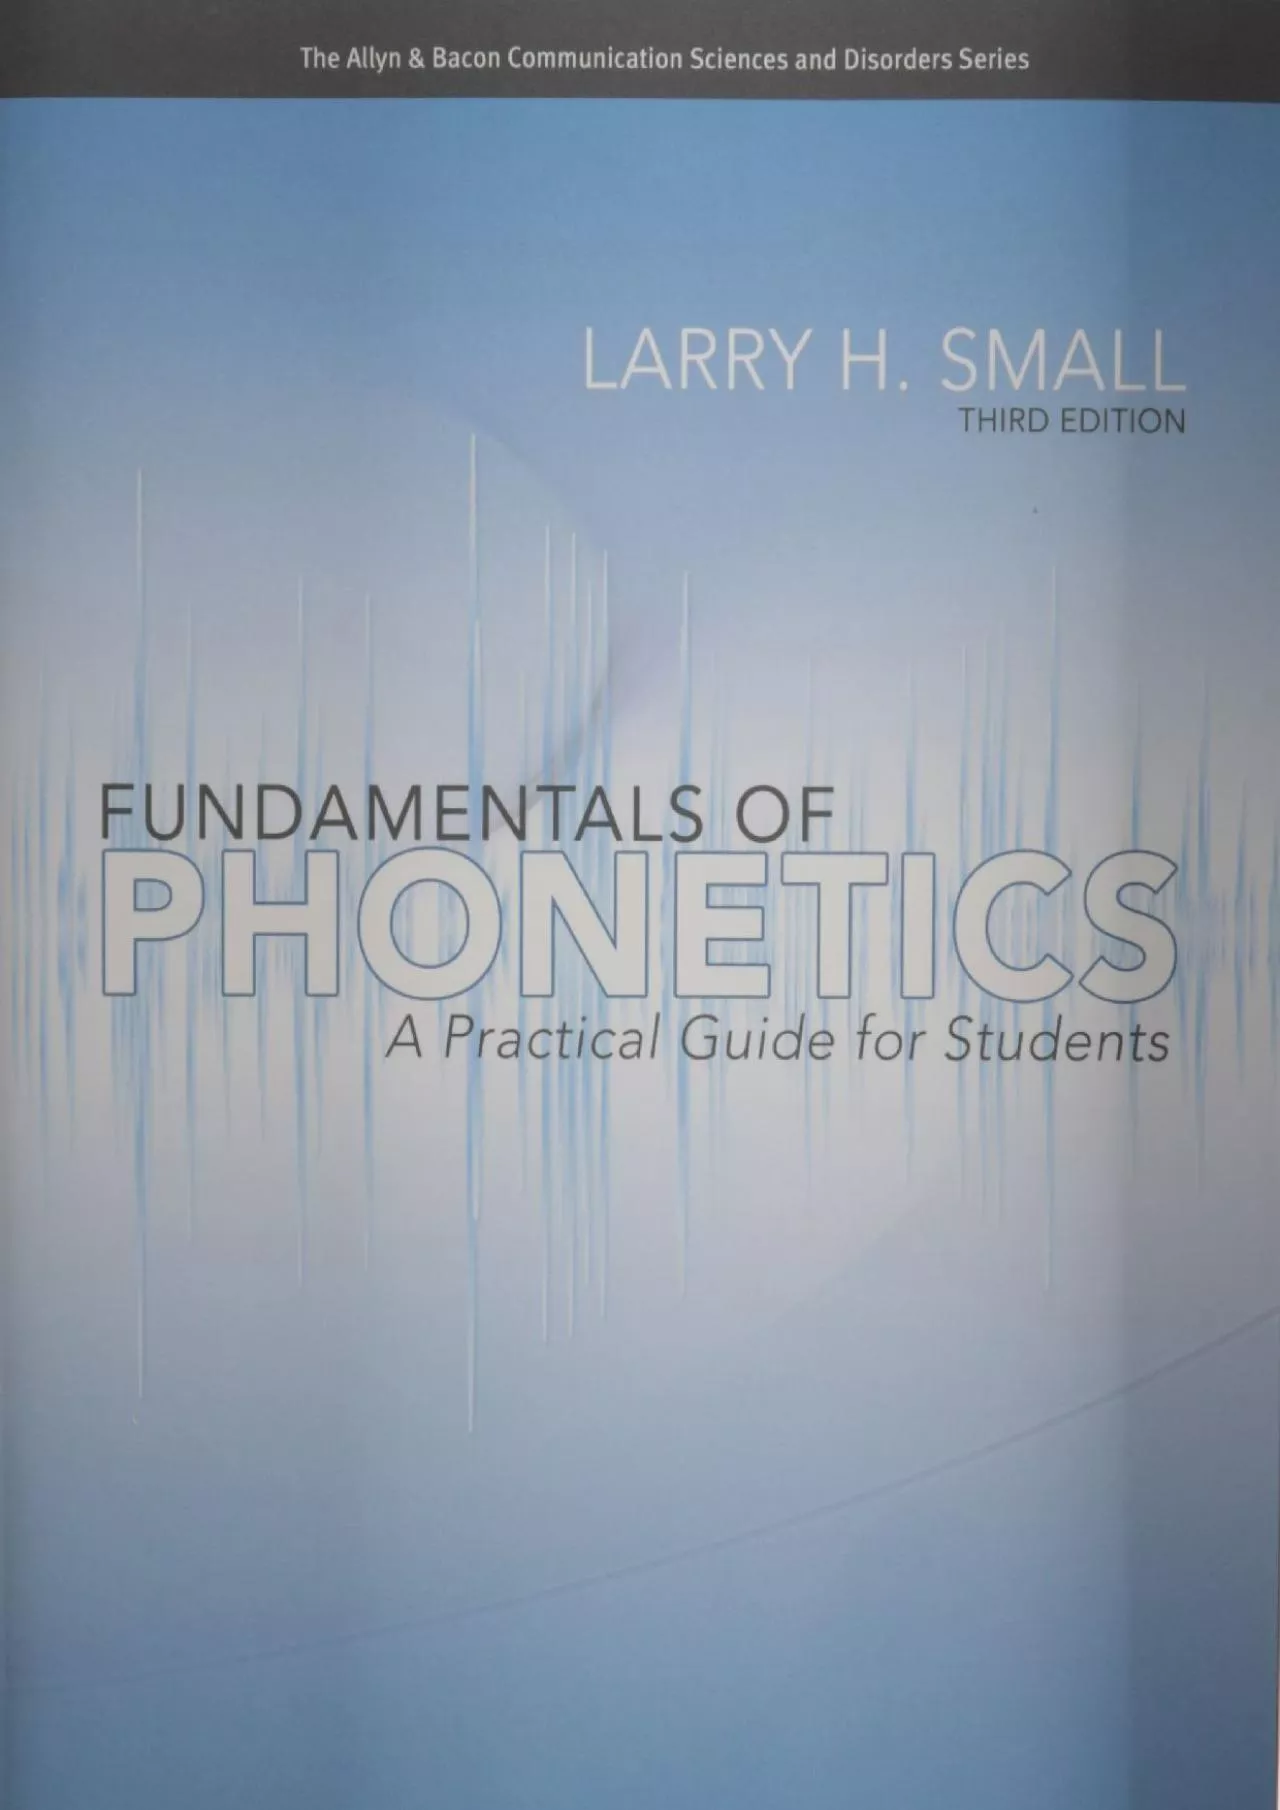 (BOOS)-Fundamentals of Phonetics: A Practical Guide for Students (3rd Edition) (Allyn